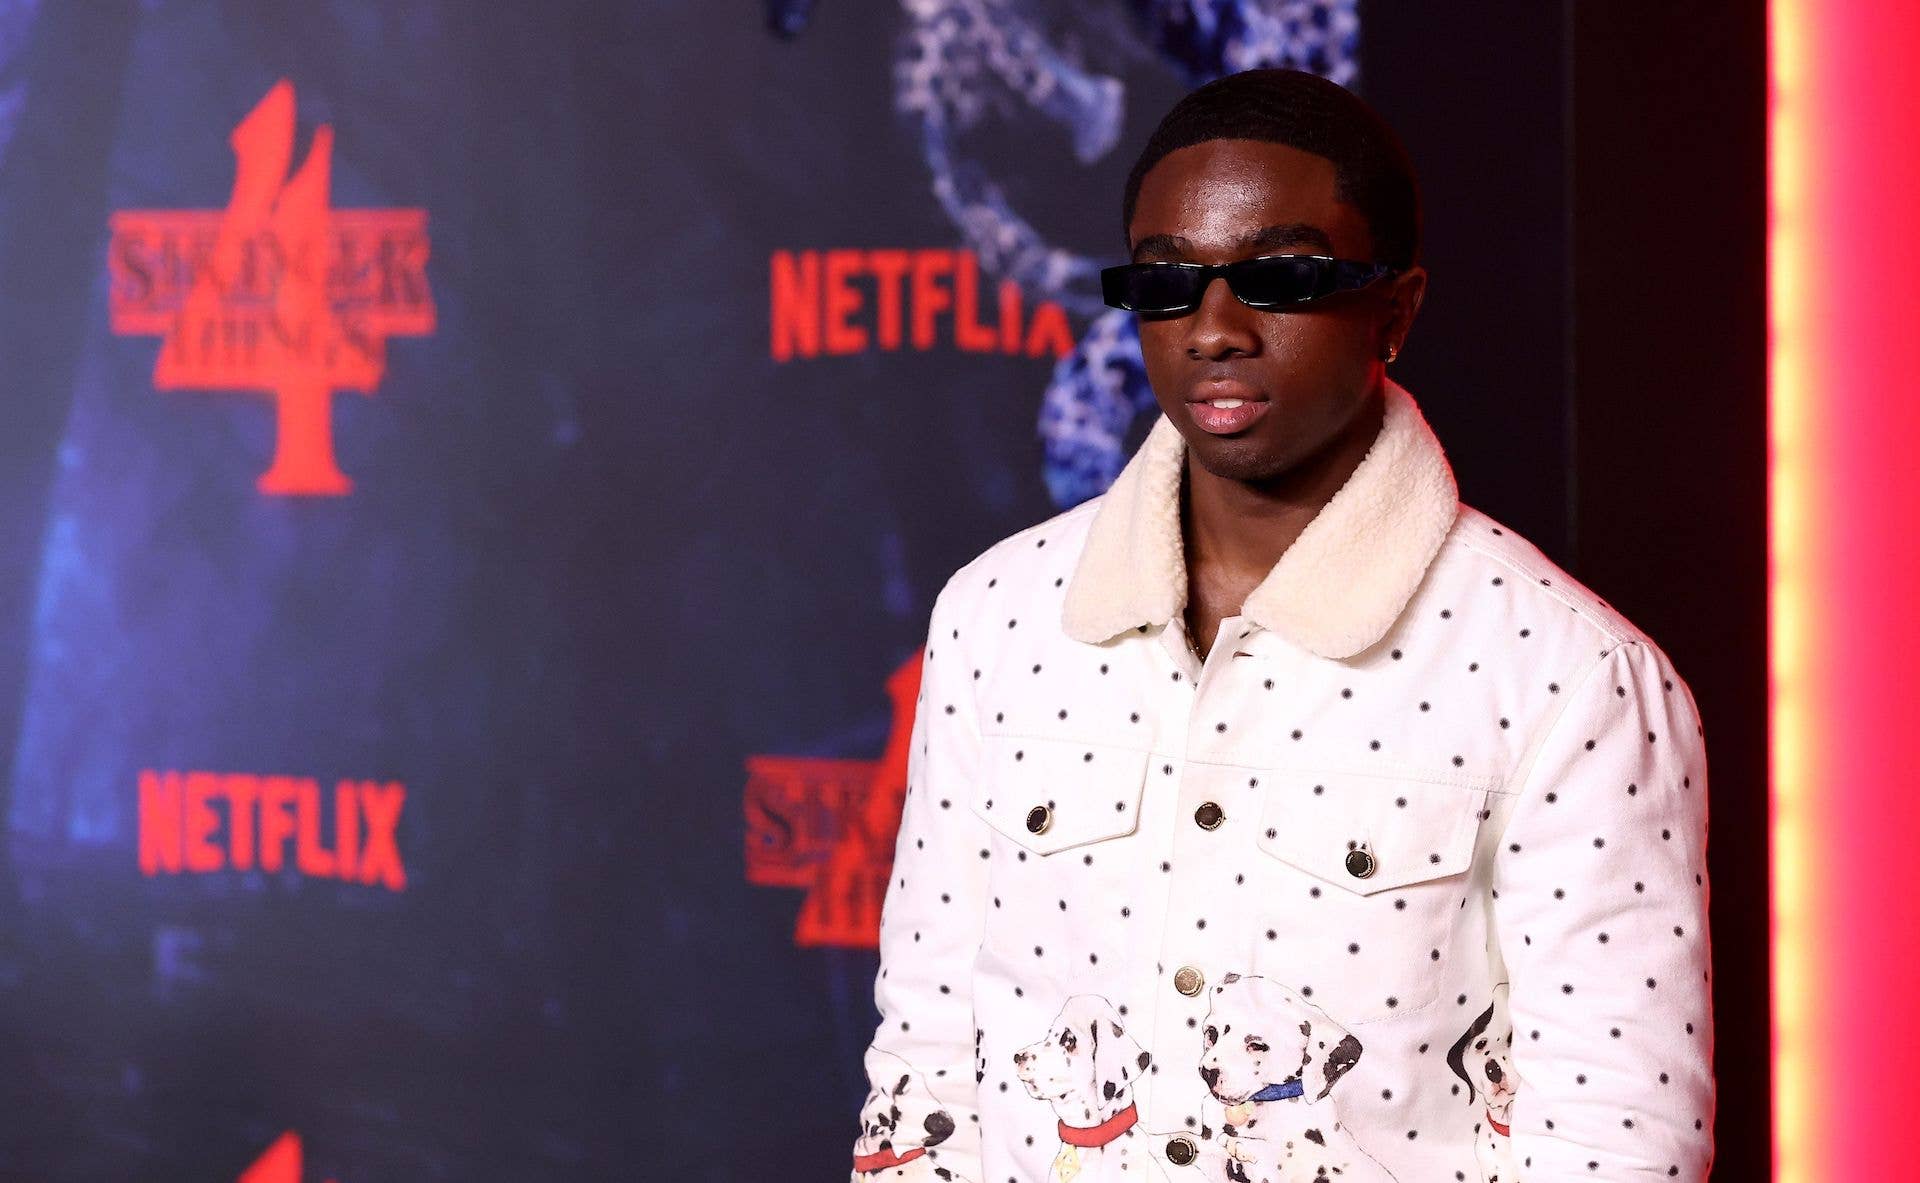 Caleb McLaughlin attends 'Stranger Things' premiere